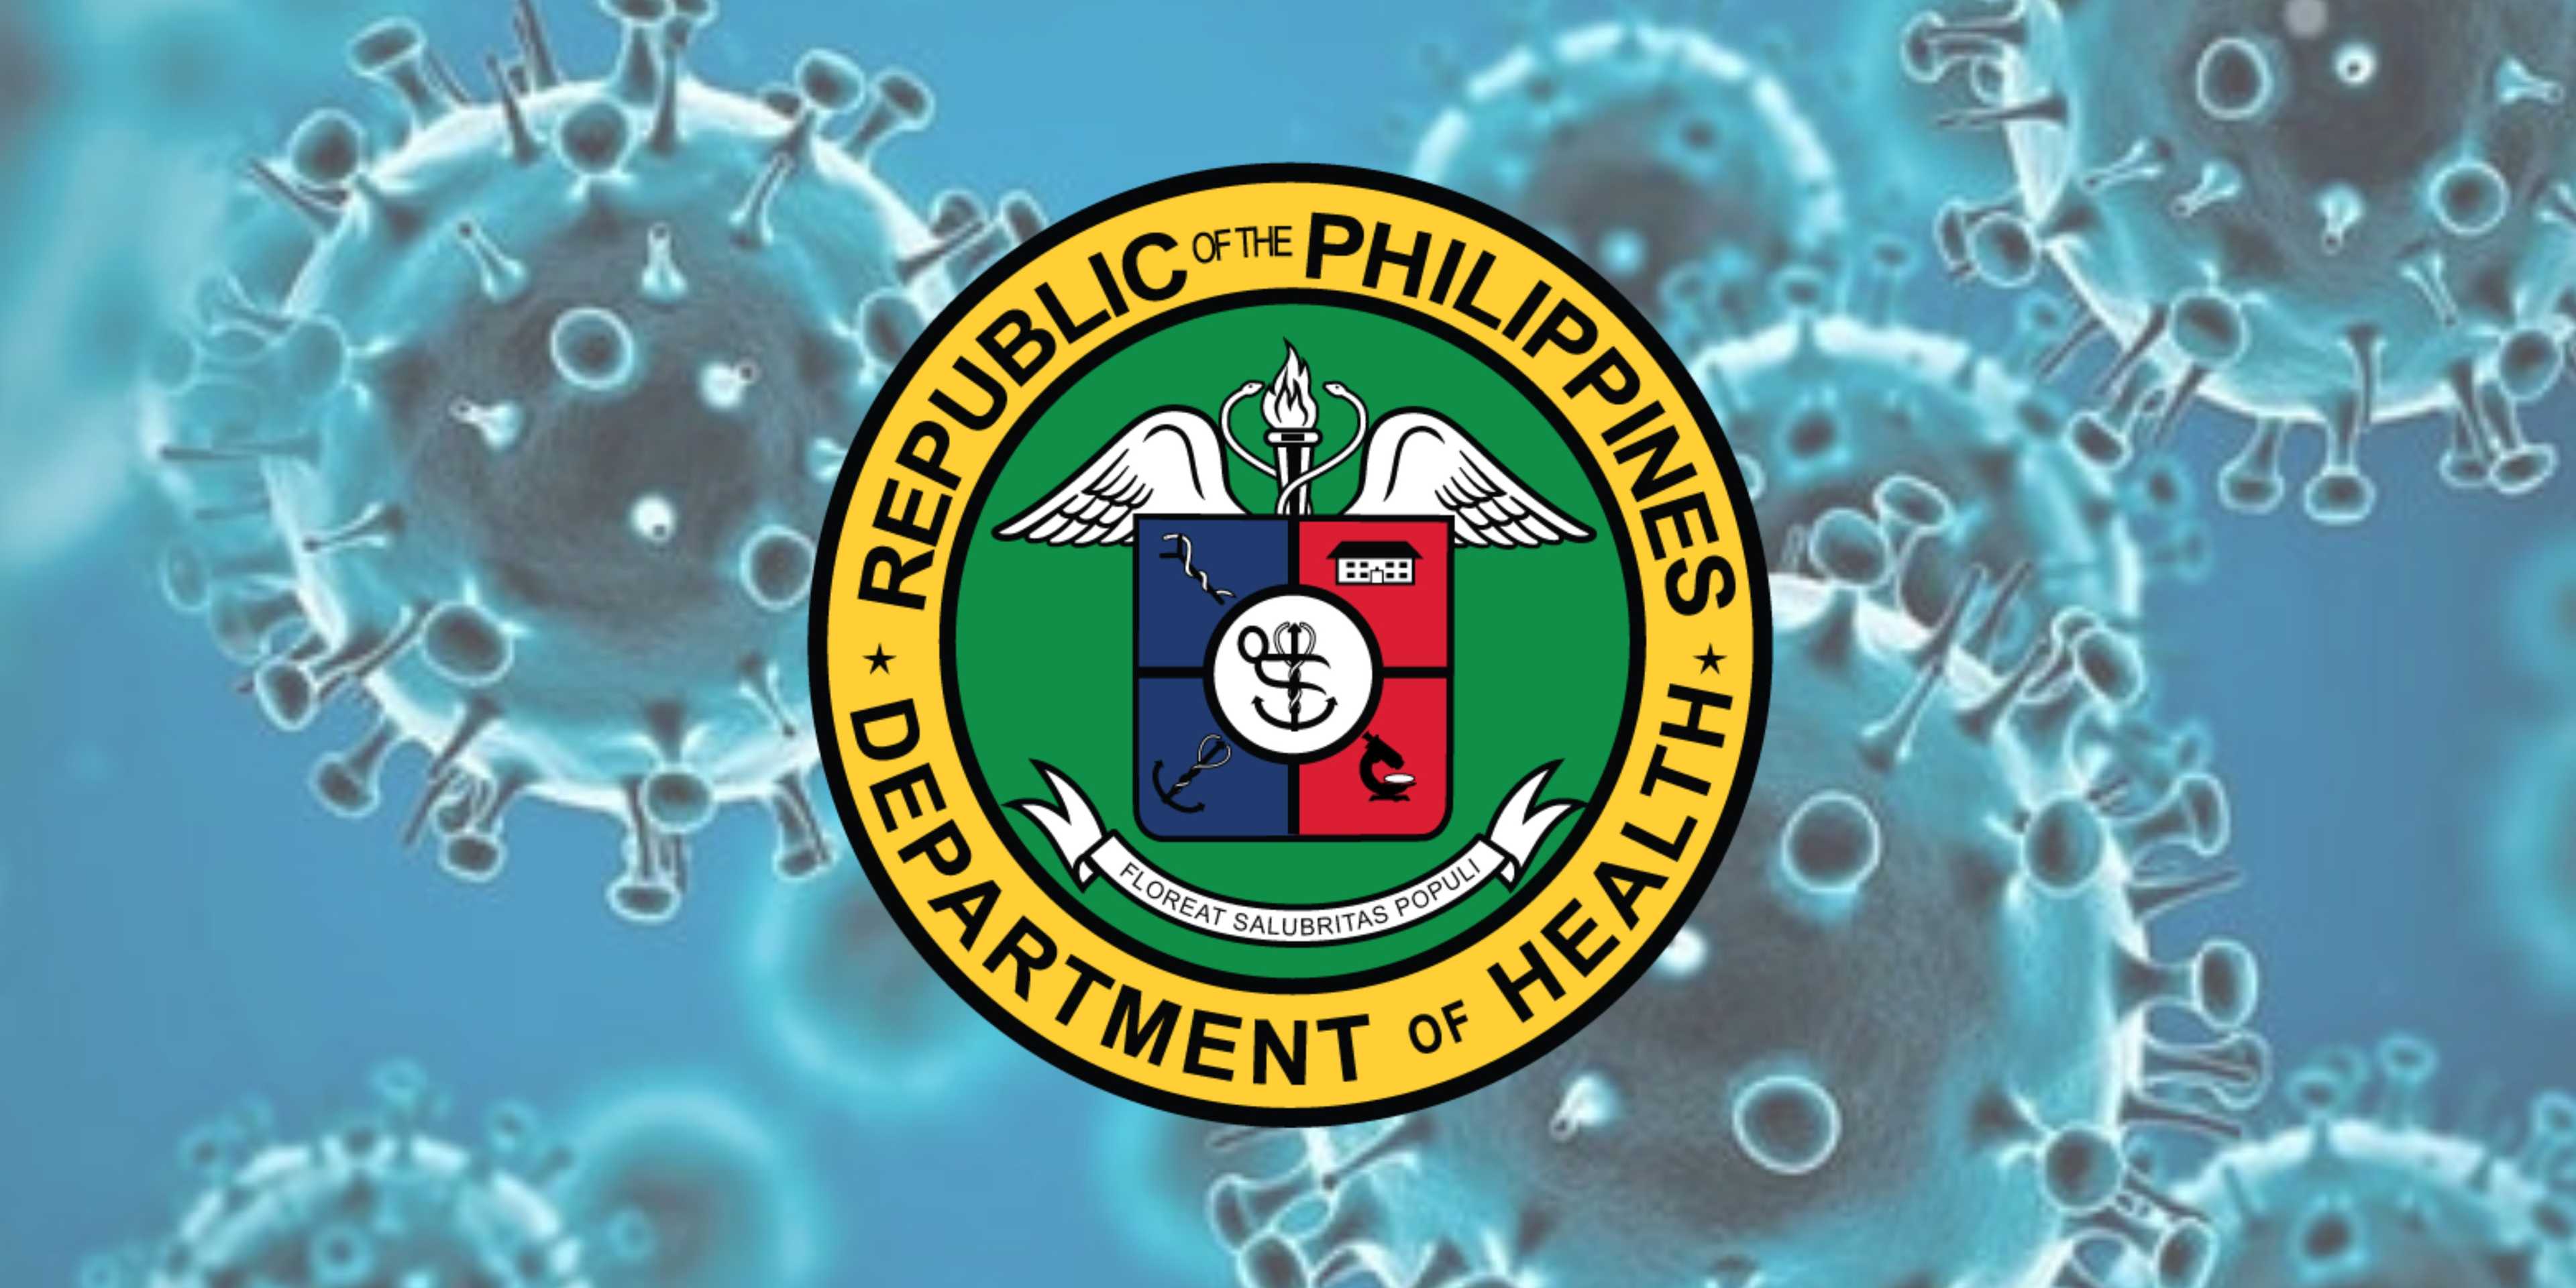 Restrictions will remain despite end of pandemic, DOH says